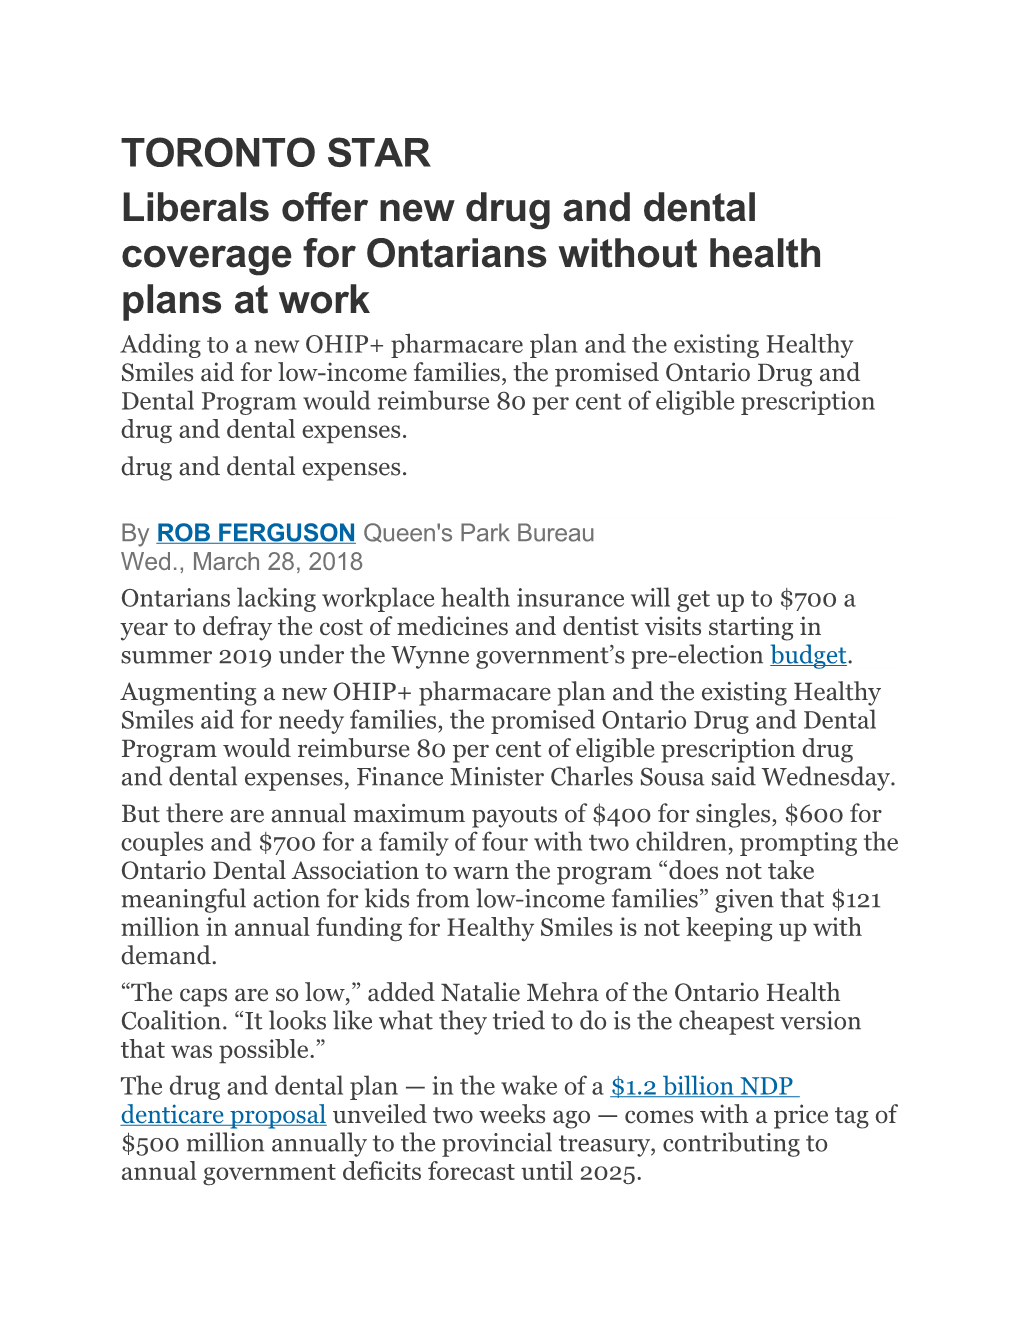 Liberals Offer New Drug and Dental Coverage for Ontarians Without Health Plans at Work